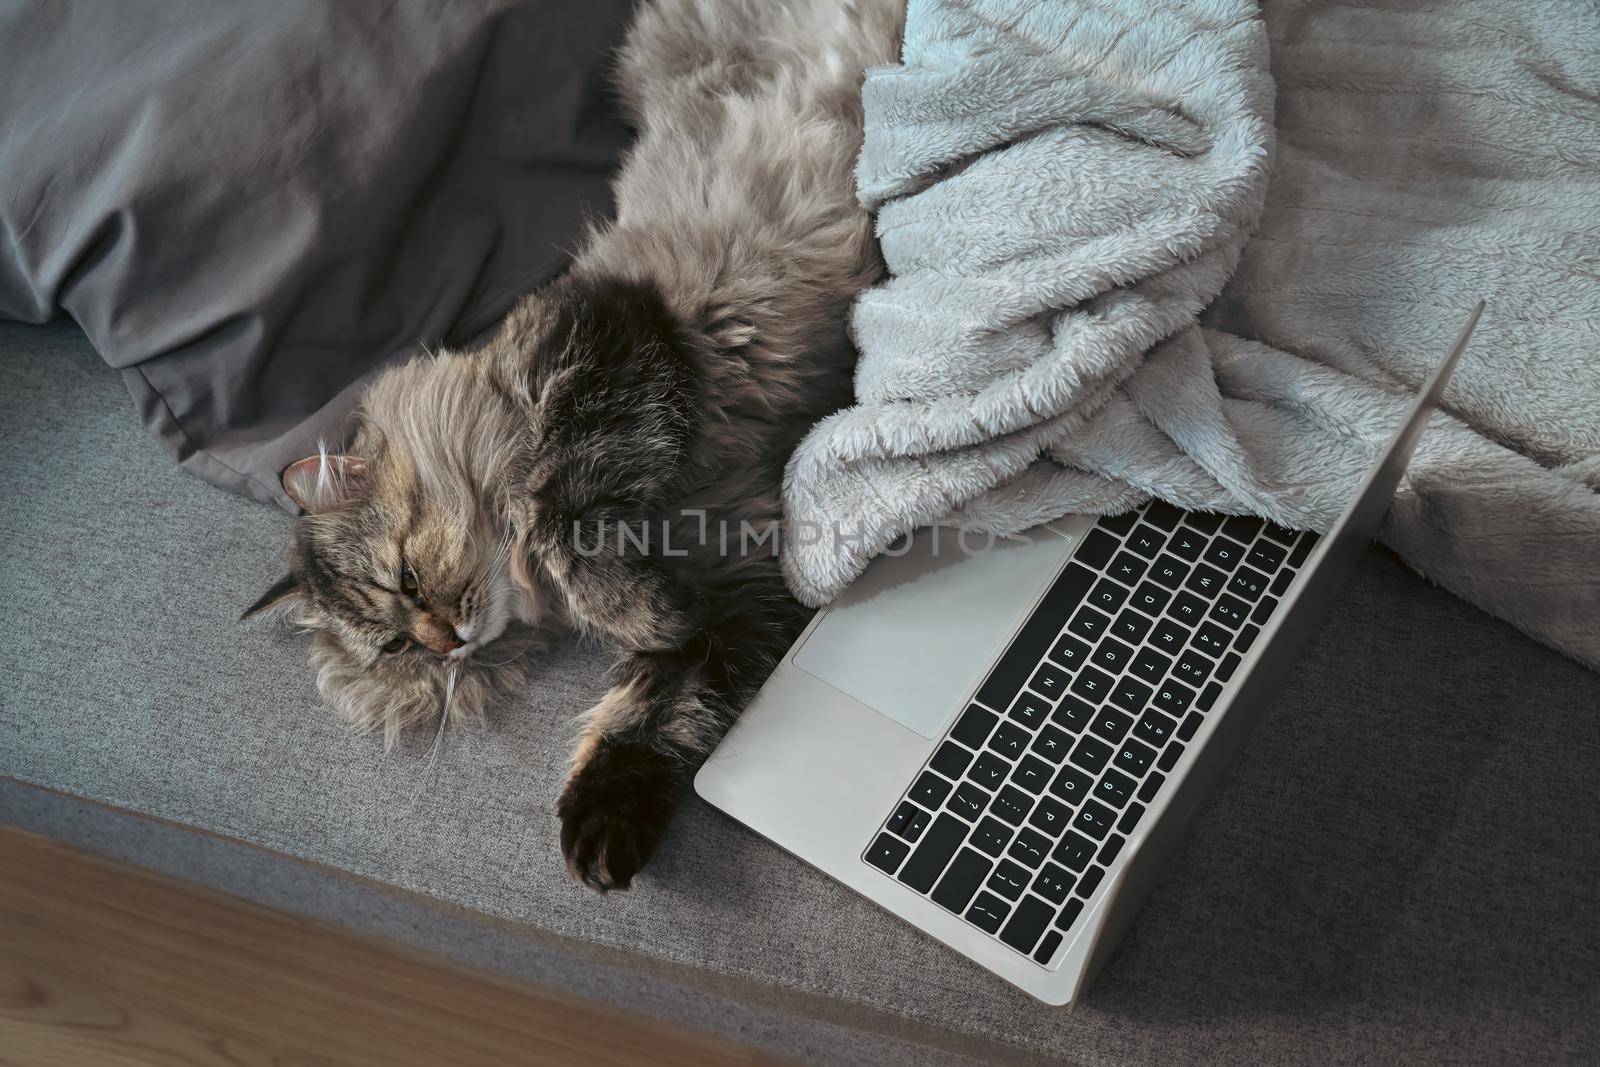 Mockup computer laptop and lovely cat on comfortable sofa. by prathanchorruangsak